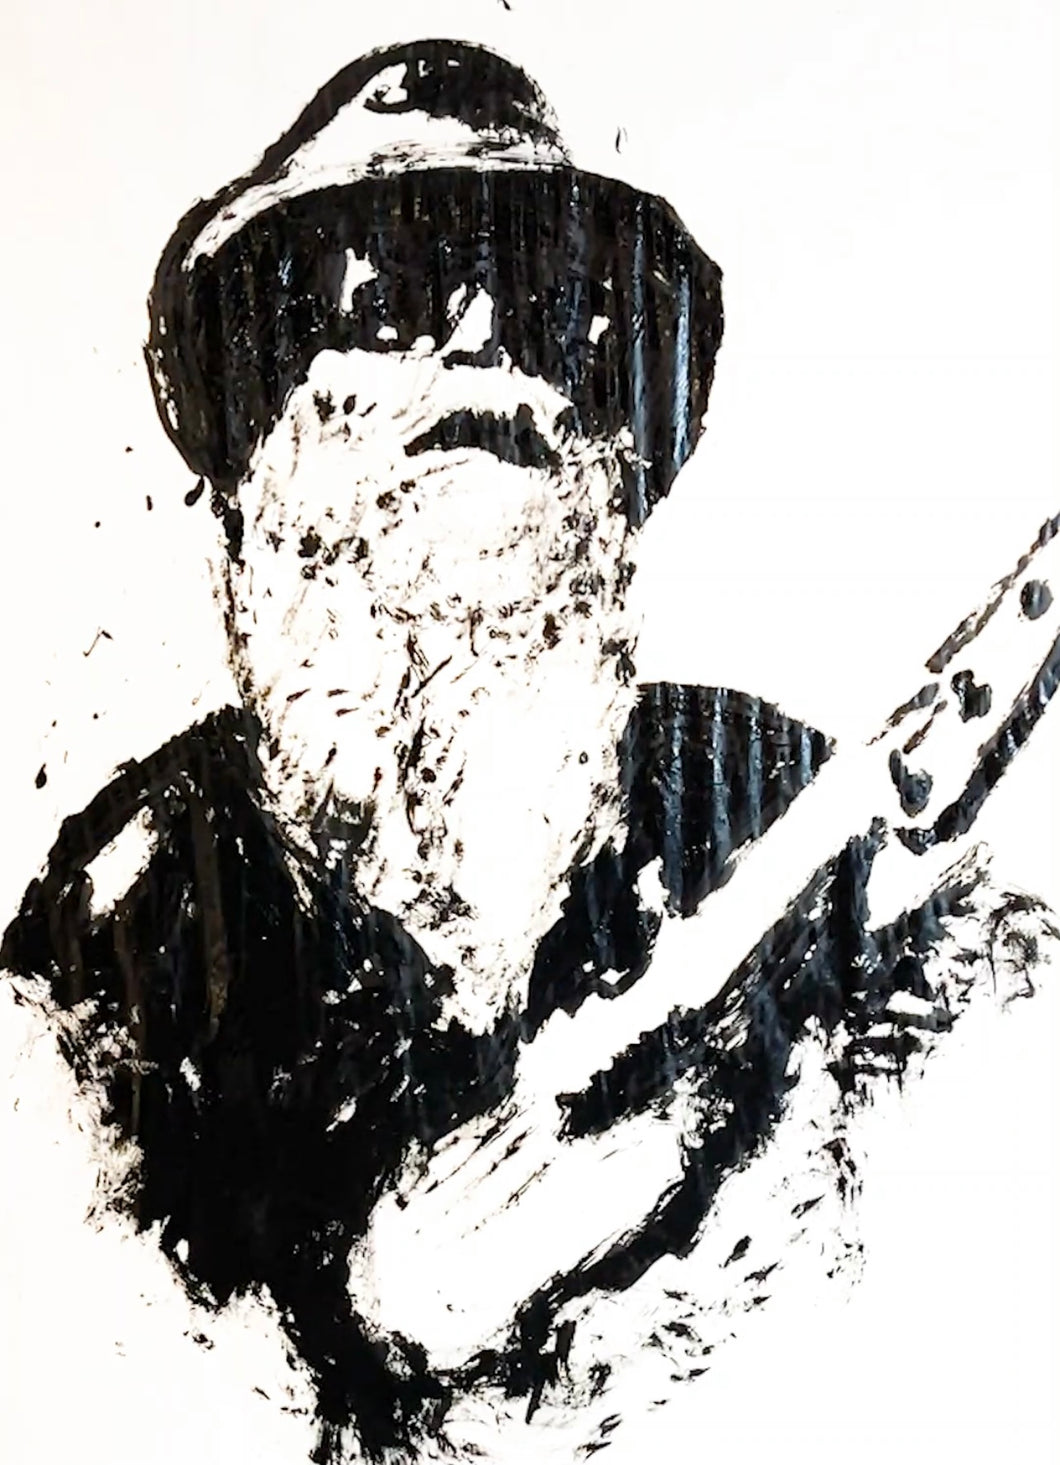 Dusty Hill - Finger painting 4ft x 5ft